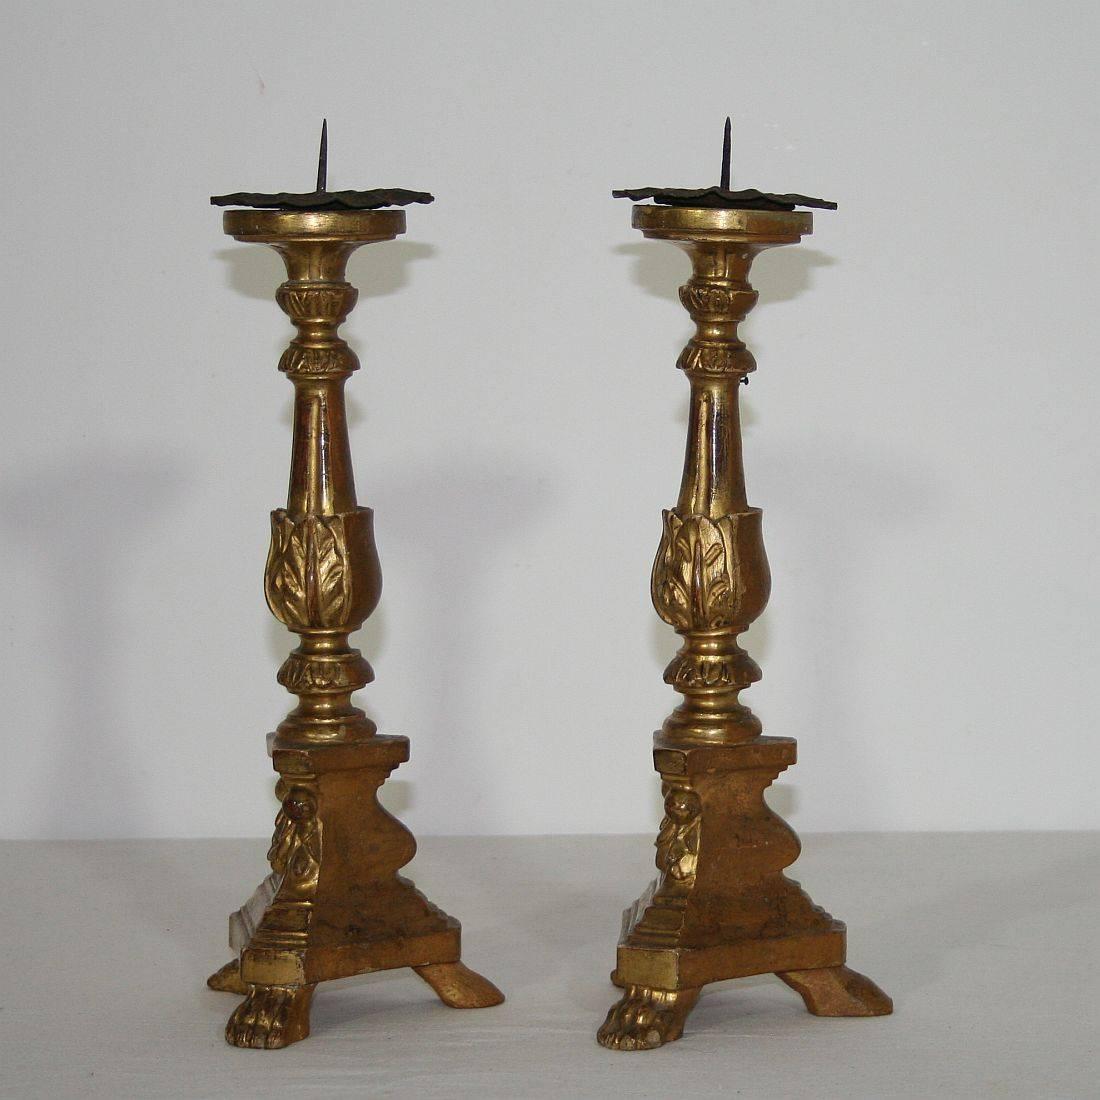 Hand-Carved 18th Century, Italian Neoclassical Giltwood Candlesticks